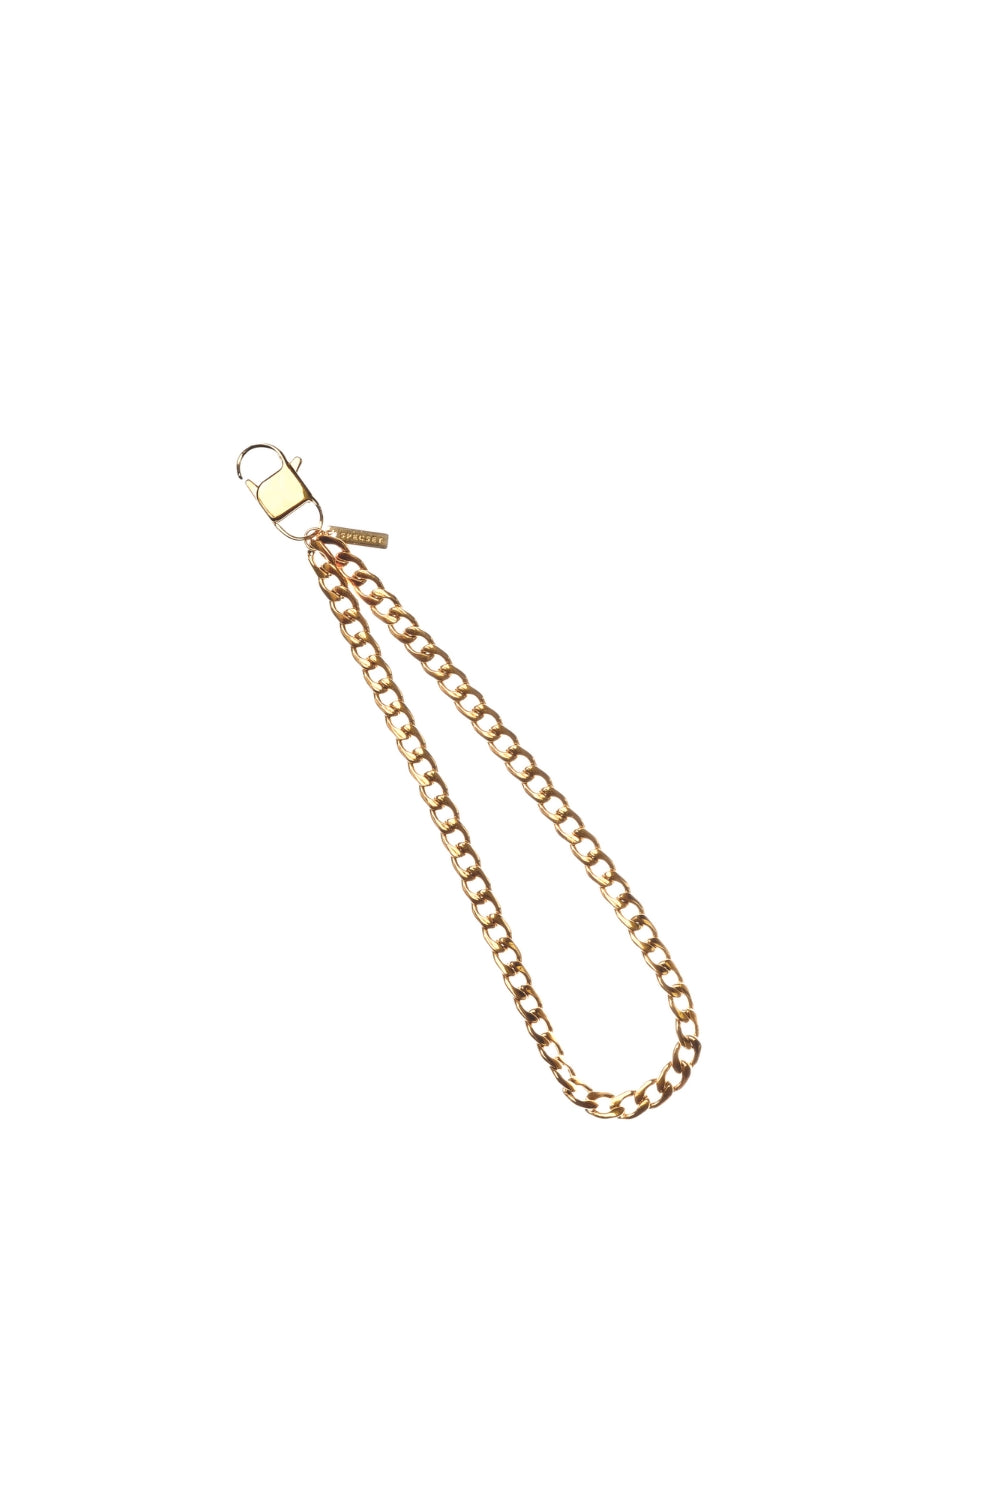 CURBY - GOLD Wrist Phone Chain | SPECSET